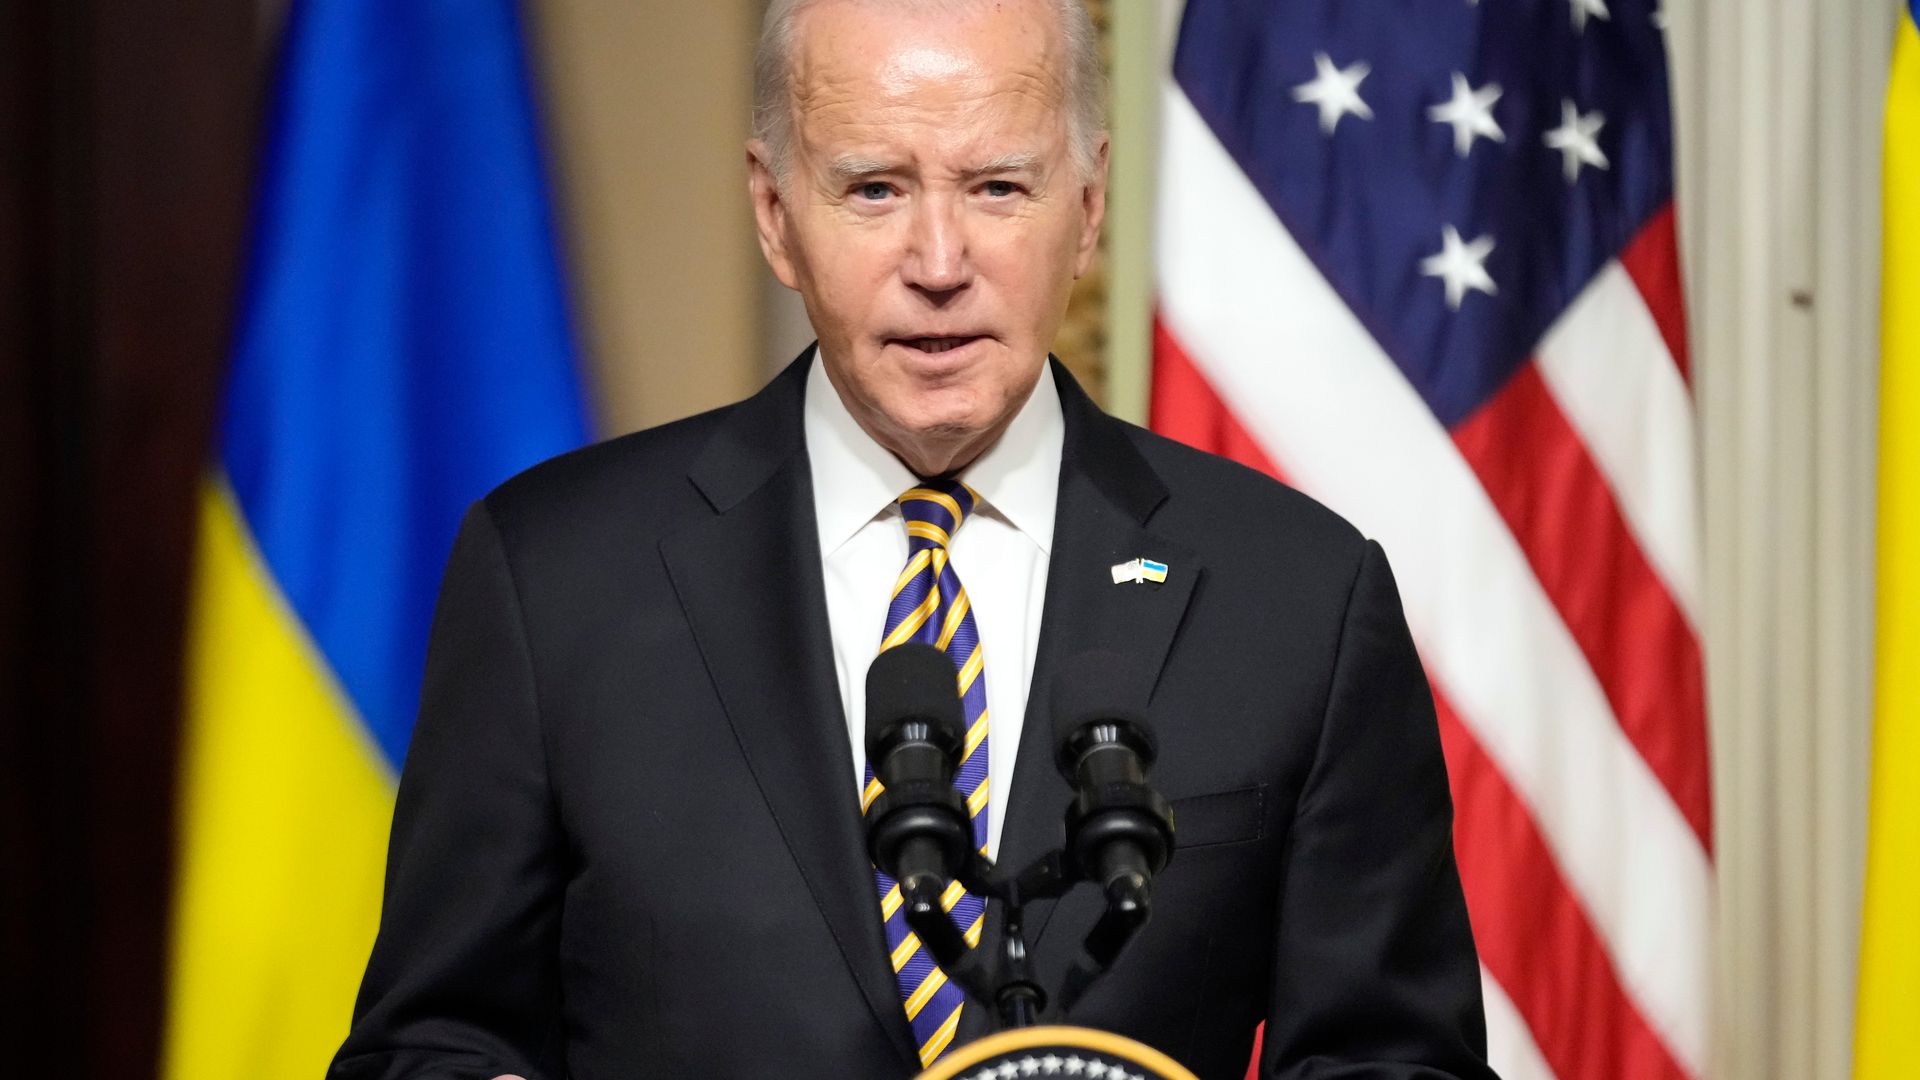 President Biden has provided updates on where the United States stands in its support of Ukraine and Israel.